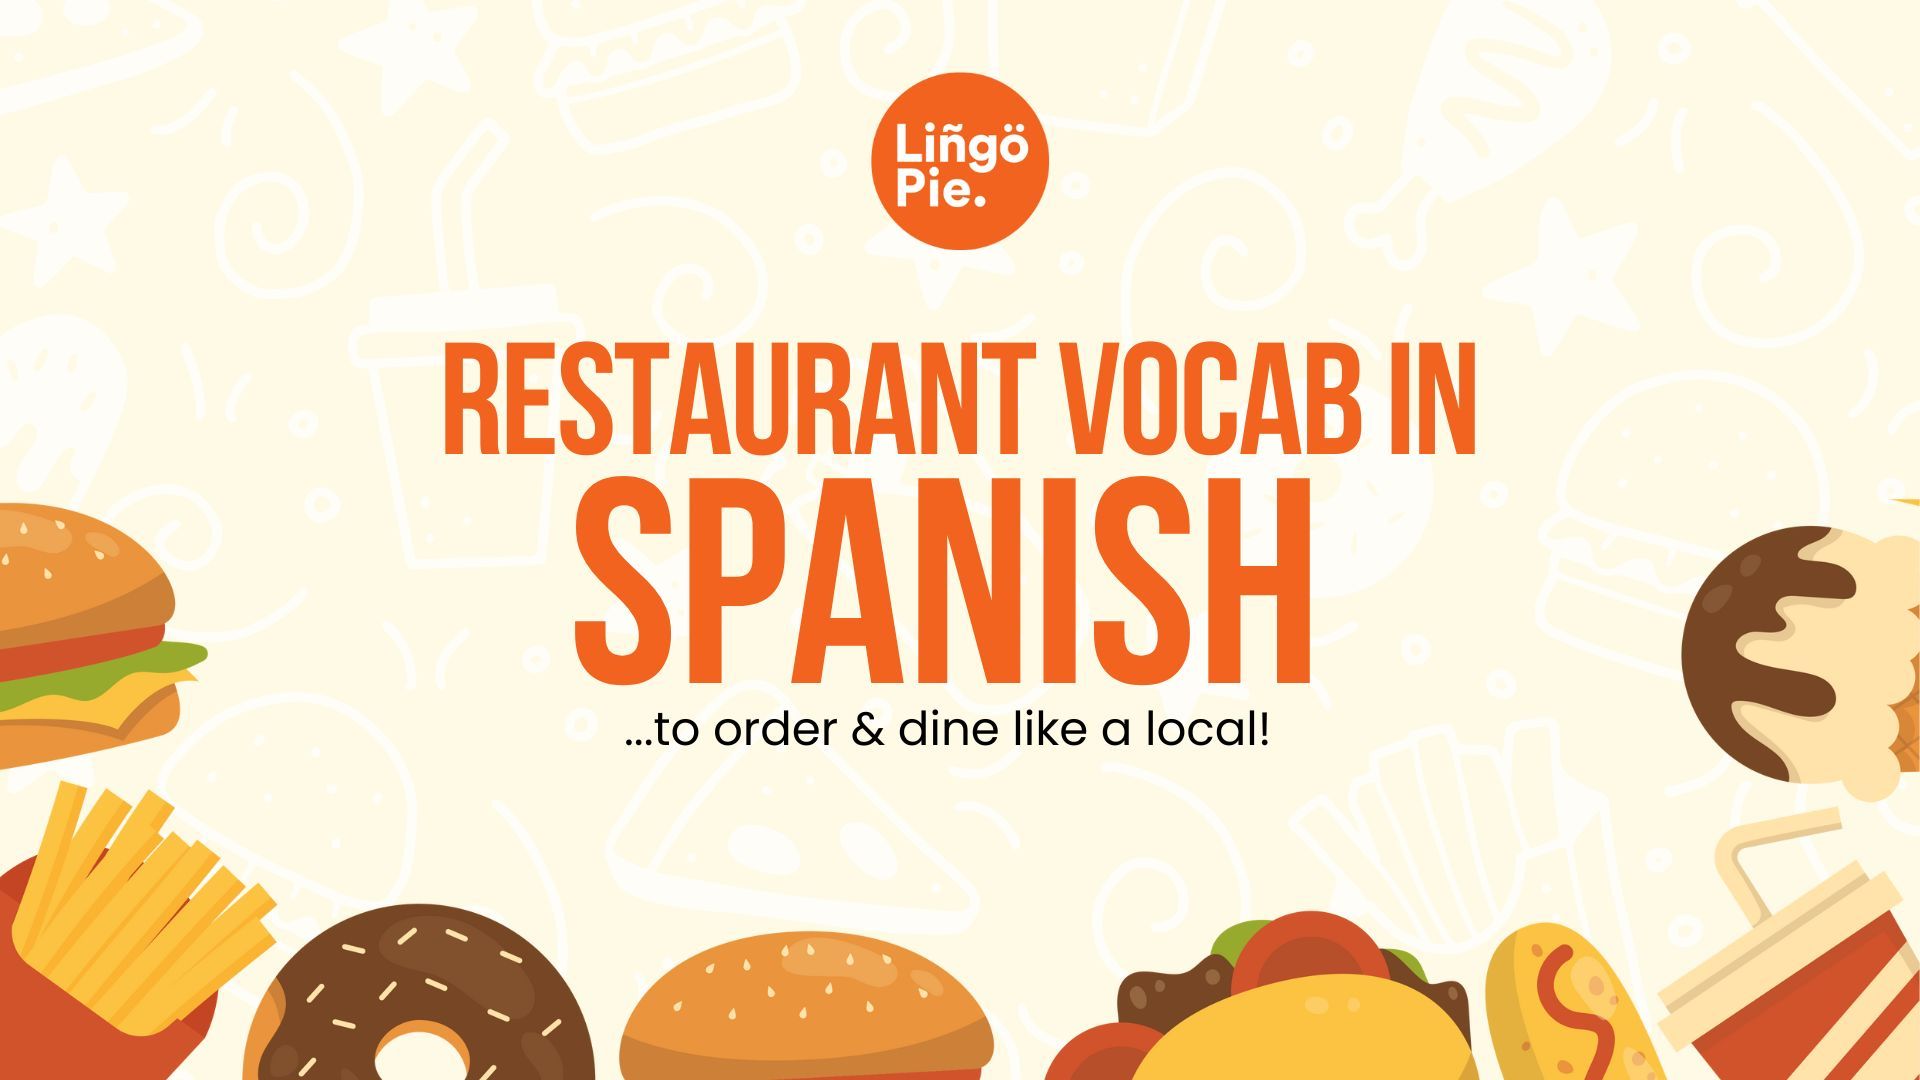 50+ Easy Spanish Restaurant Vocabulary And Phrases [Guide]